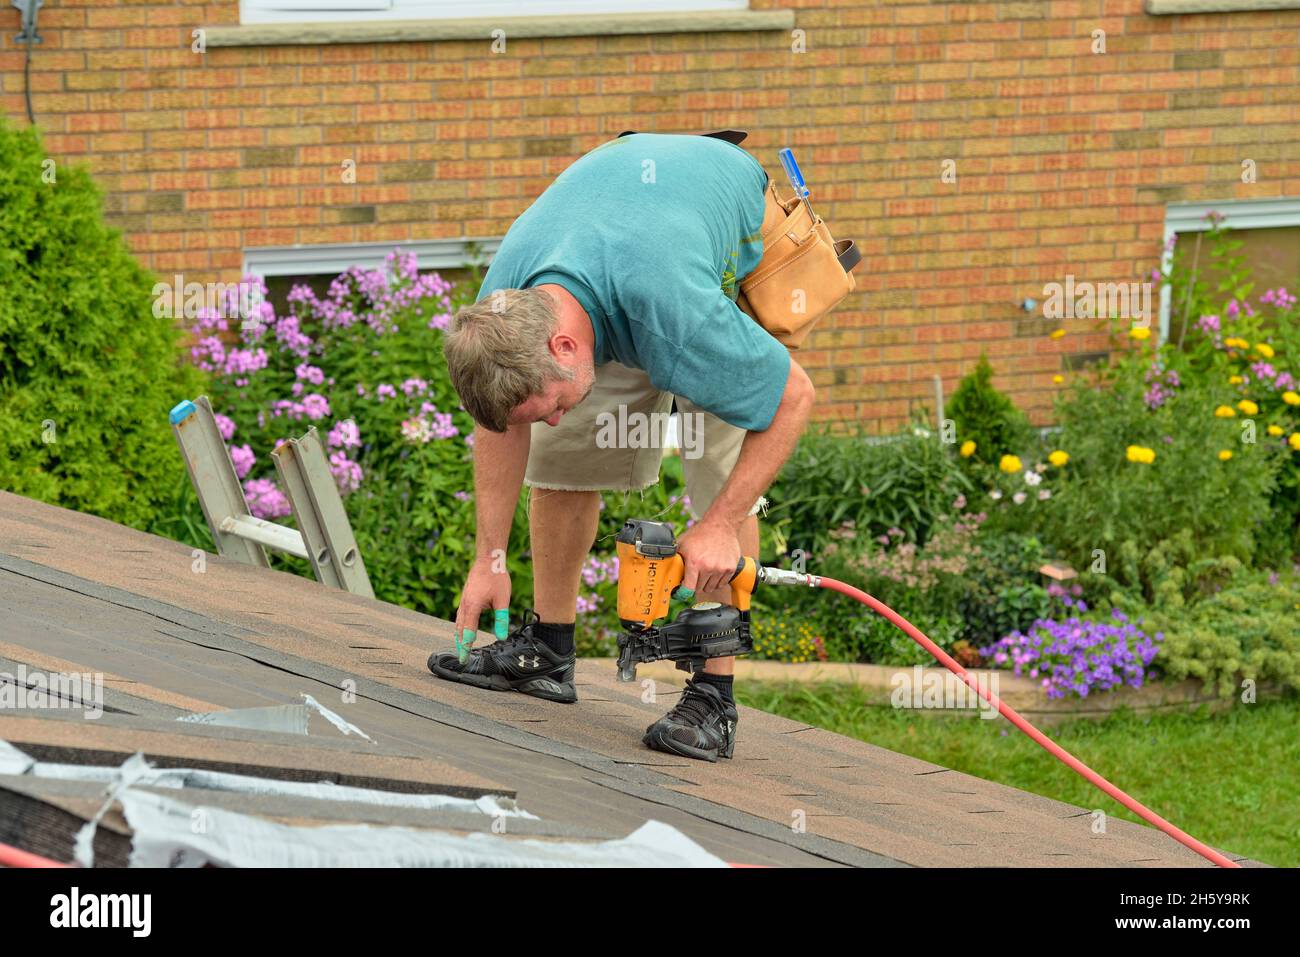 Installing shingles on a roof. Using an automatic shingle nailer, Greater Sudbury (Lively), Ontario, Canada Stock Photo